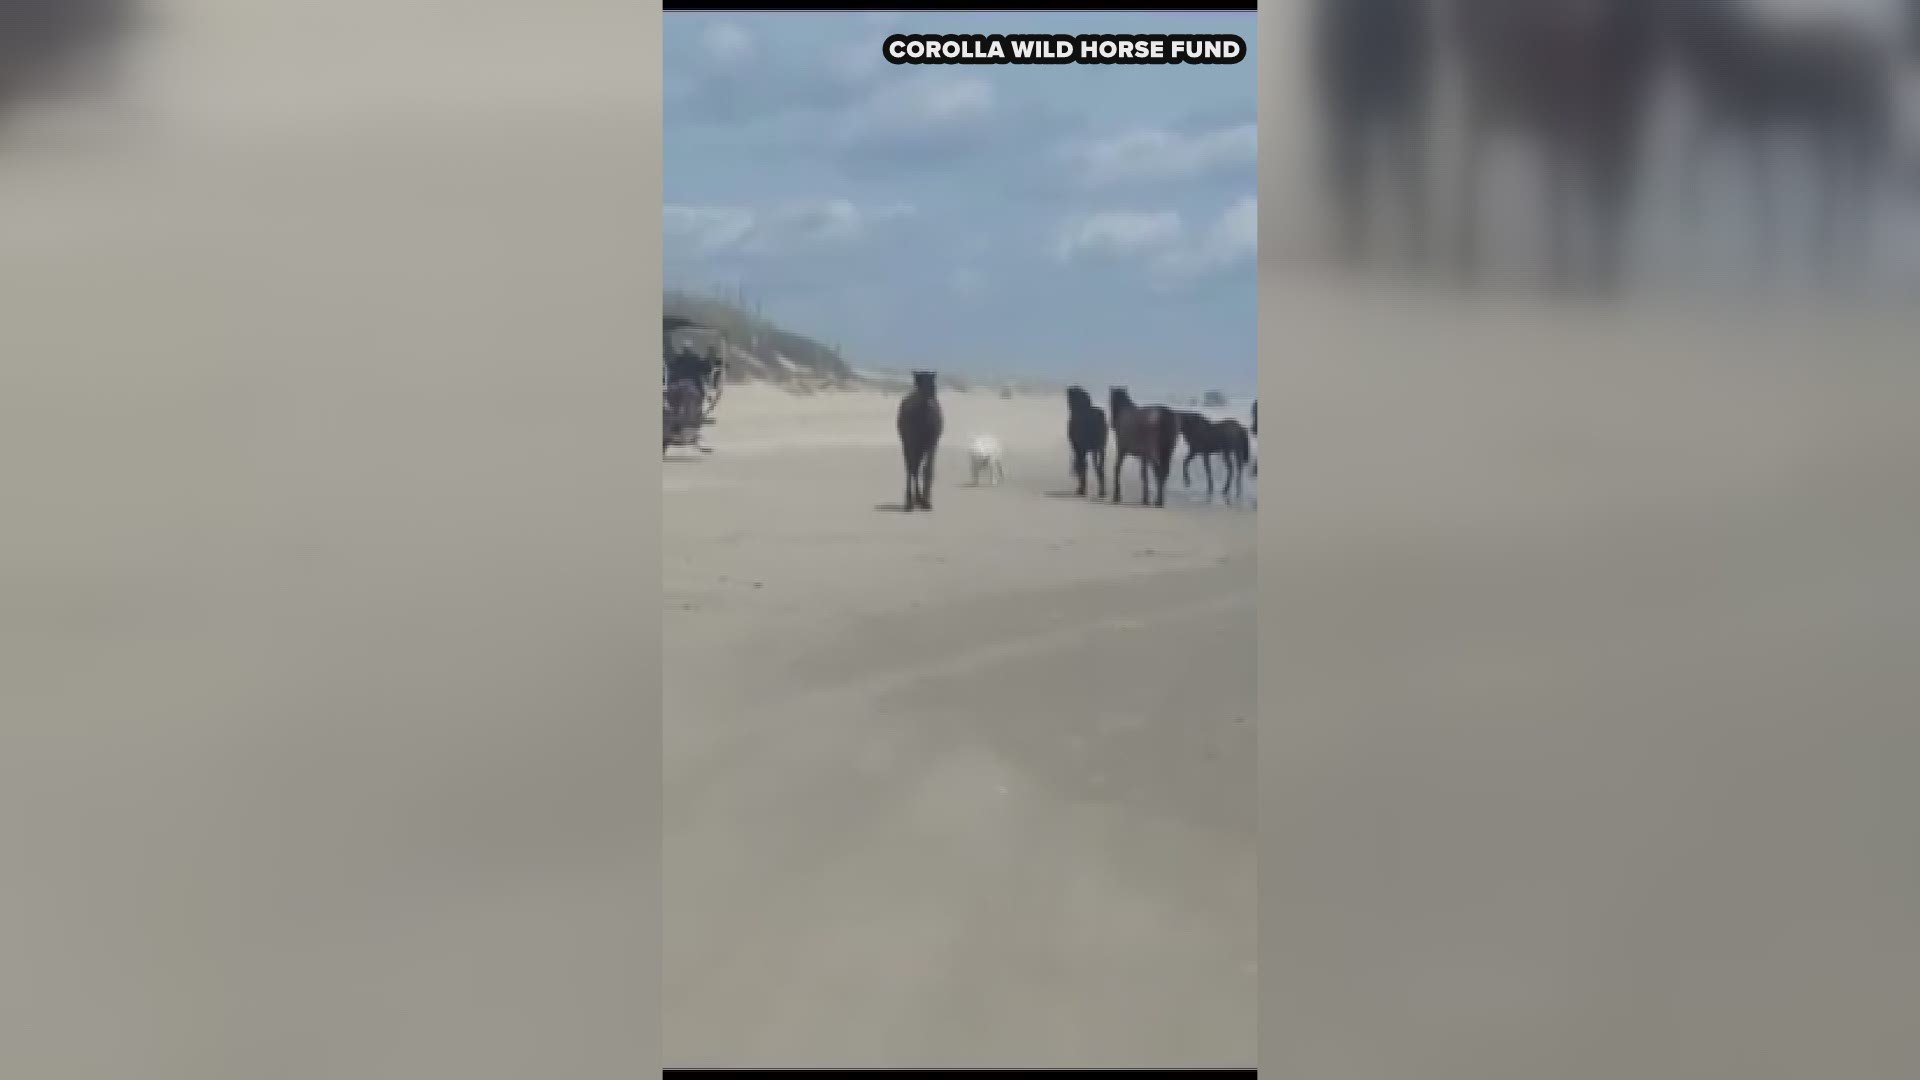 A group that keeps an eye on the wild horses on the North Carolina coast says free roaming dogs have become a threat. Meg Puckett, herd manager of the Corolla Wild Horse Fund, says tourists are leaving their pets unleashed, and those pets are chasing and even biting the horses.